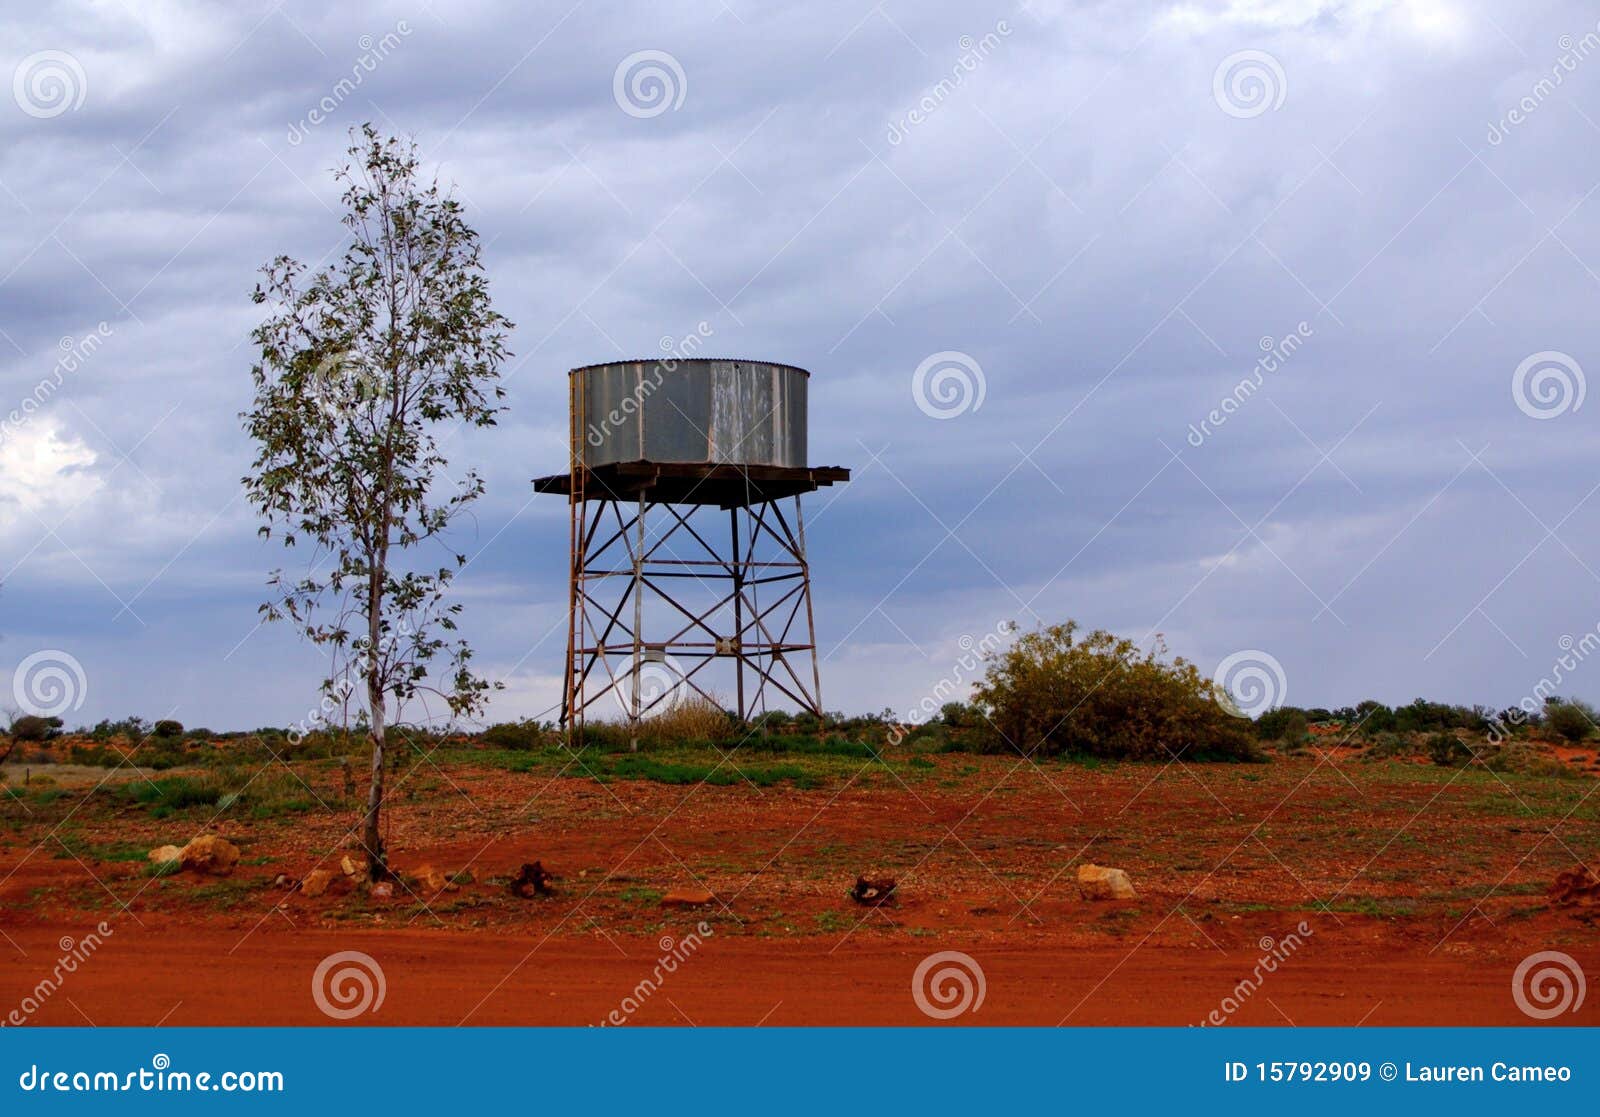 mary vale water tank